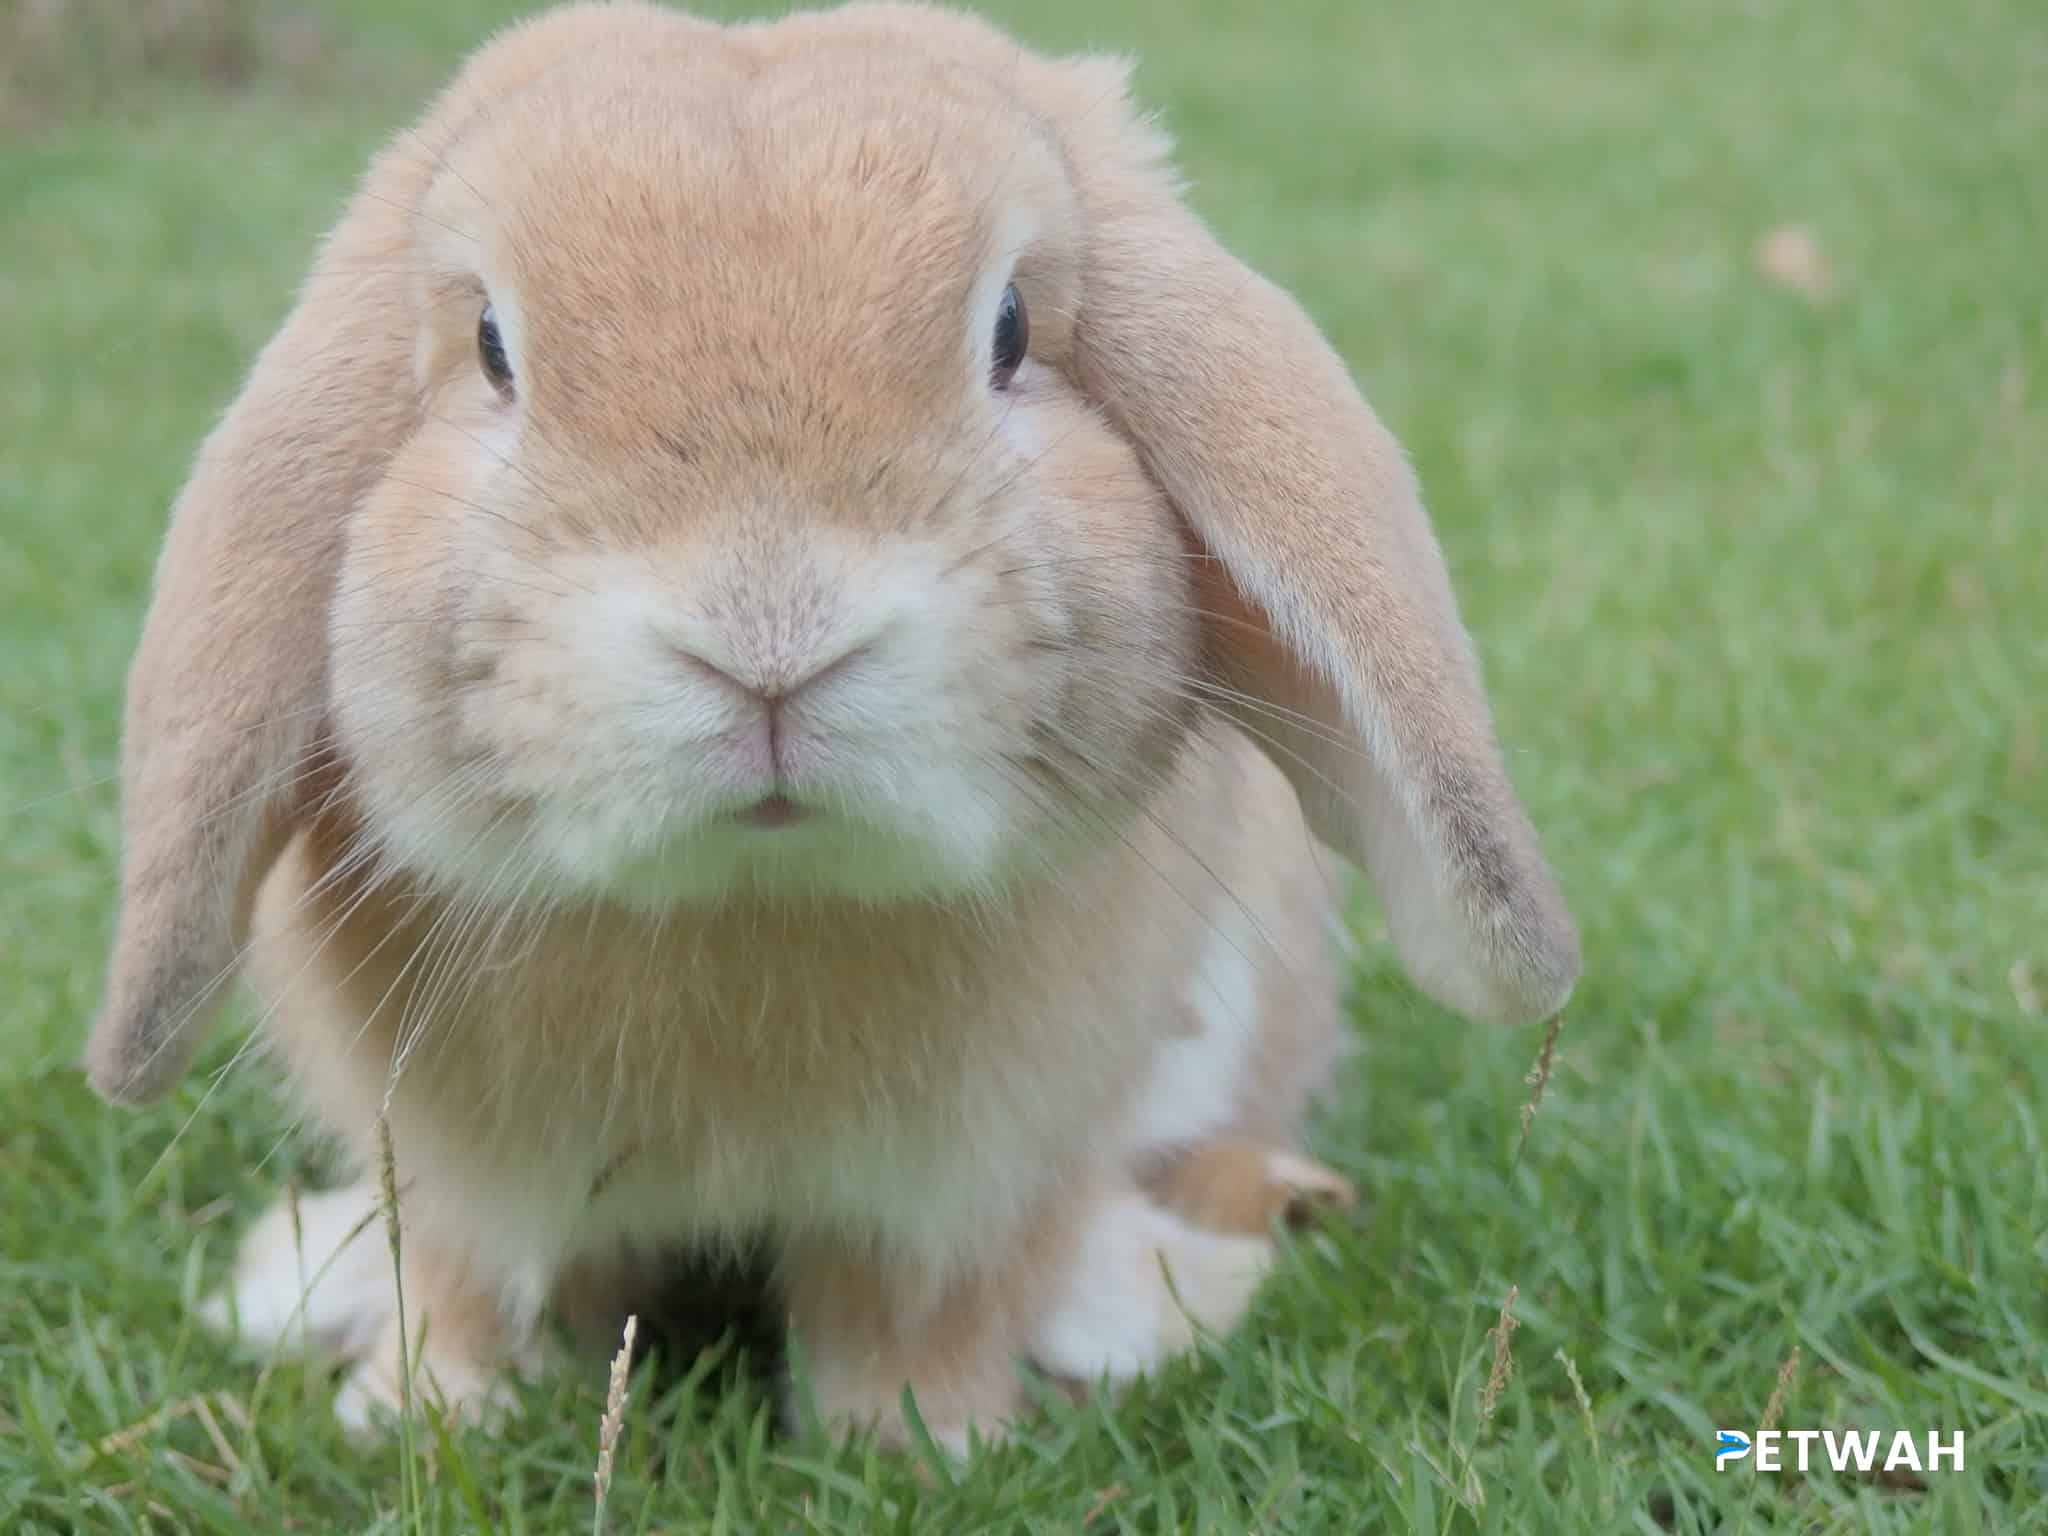 Top Tips for Keeping Your Pet Rabbit Active and Playful